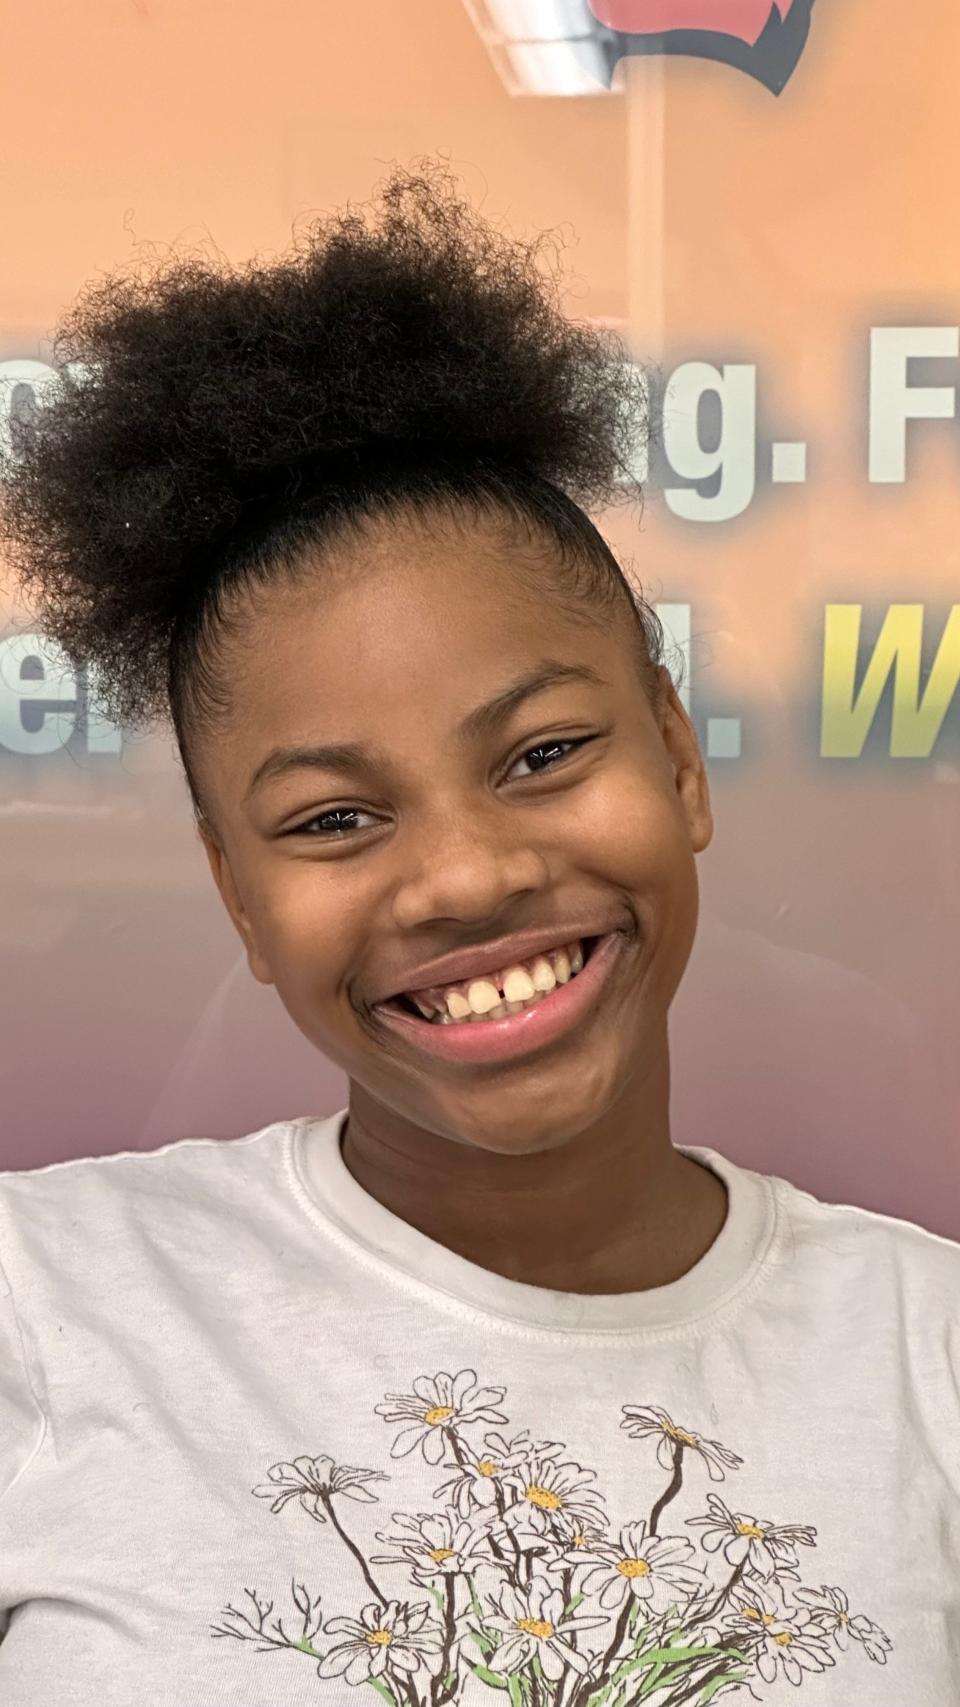 Journee Grandberry, a fifth grader at Samuel Clemens School, won first place in the Grades 4-5 category of the 41st Martin Luther King Jr. Essay contest, announced in January 2024.